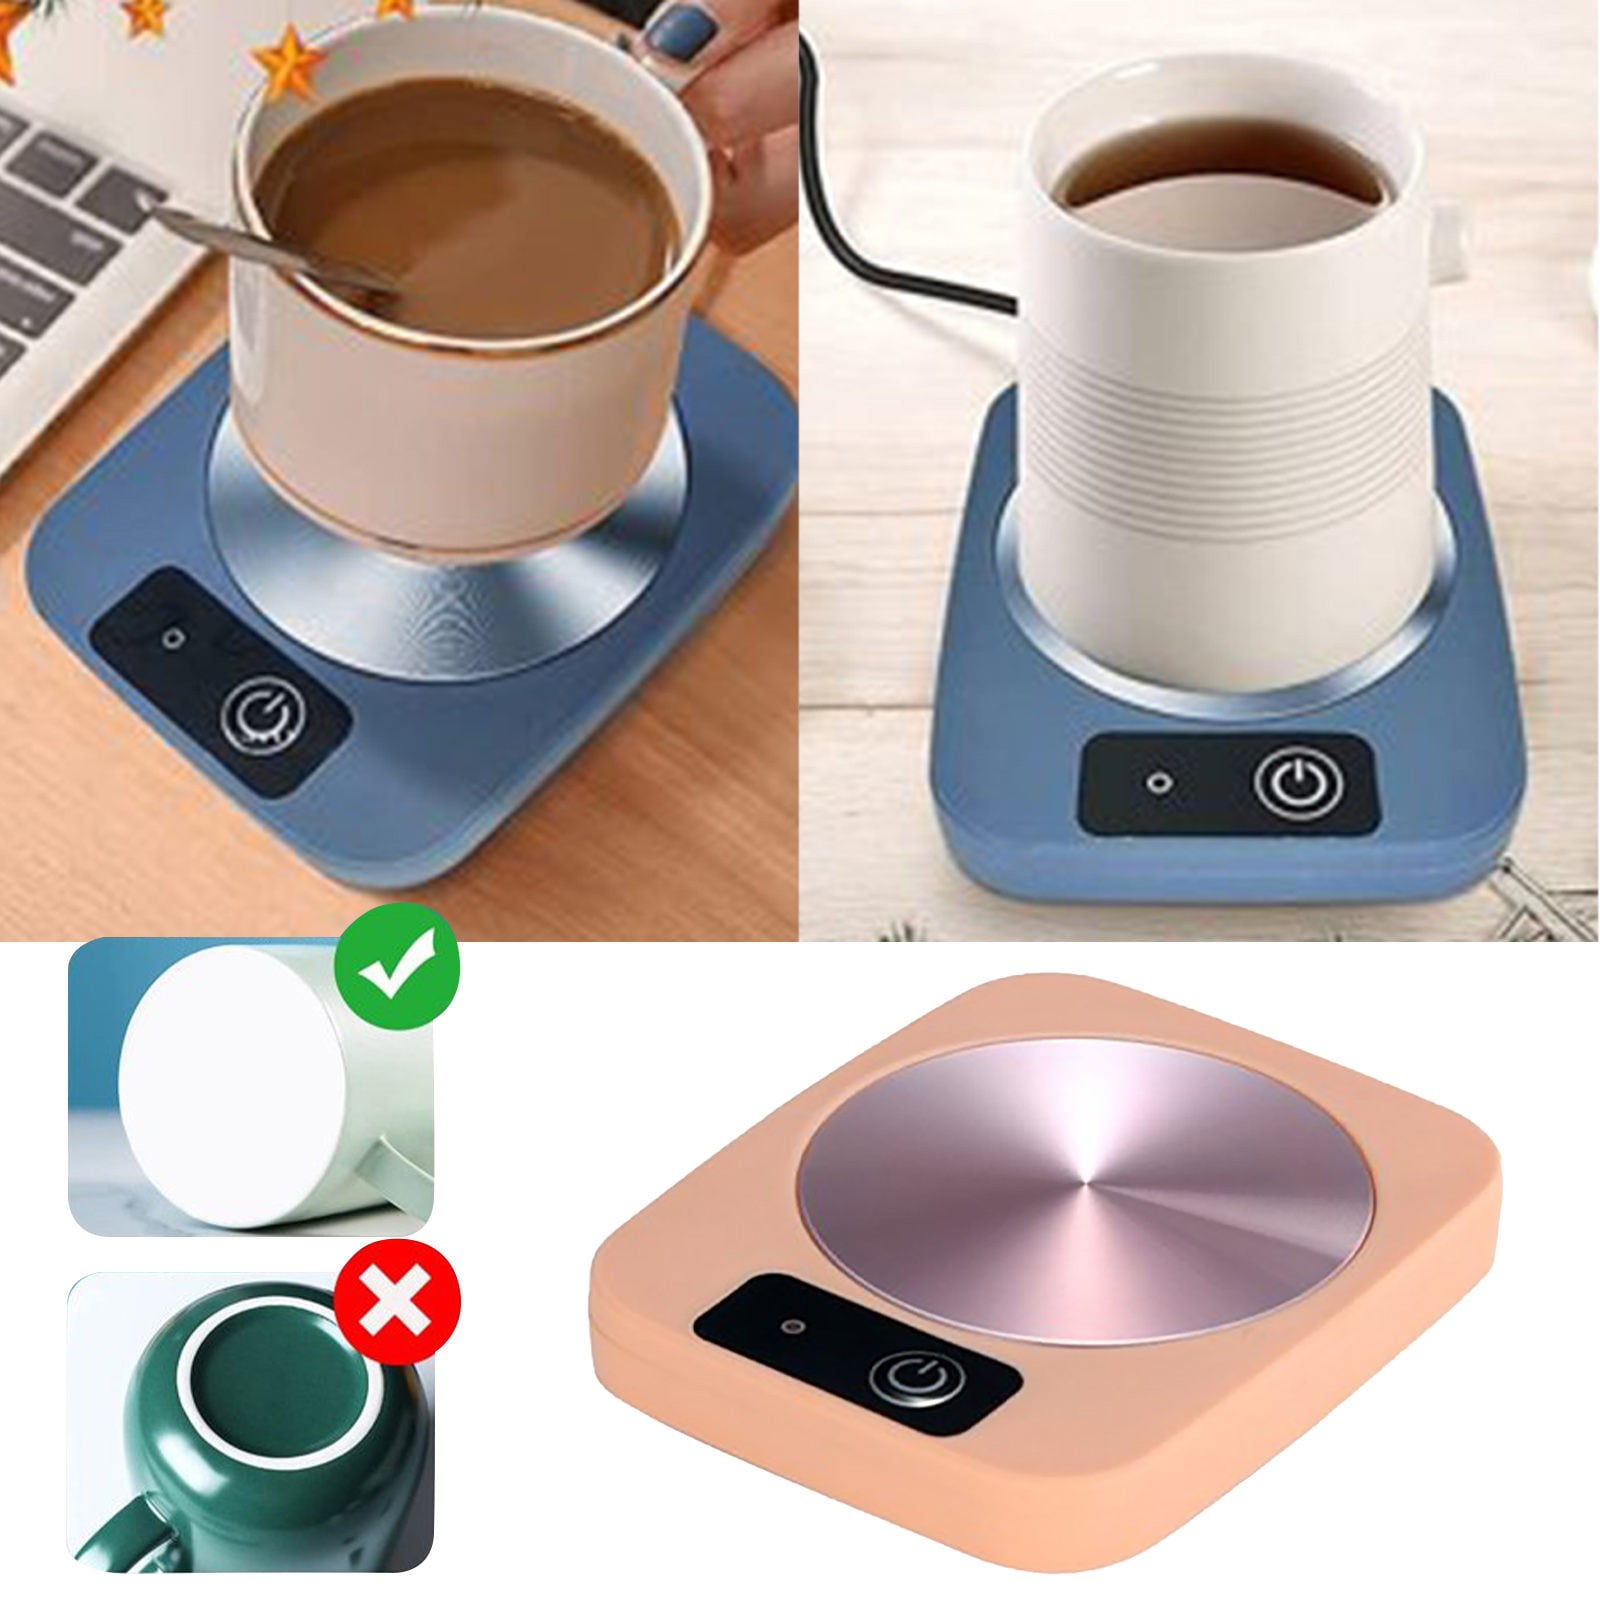 VOBAGA Imitation Wood Grain Coffee Cup Warmer & Mug Warmer for Desk, Electric Cup Beverage Warmer Plate with 3 Temperature Setti